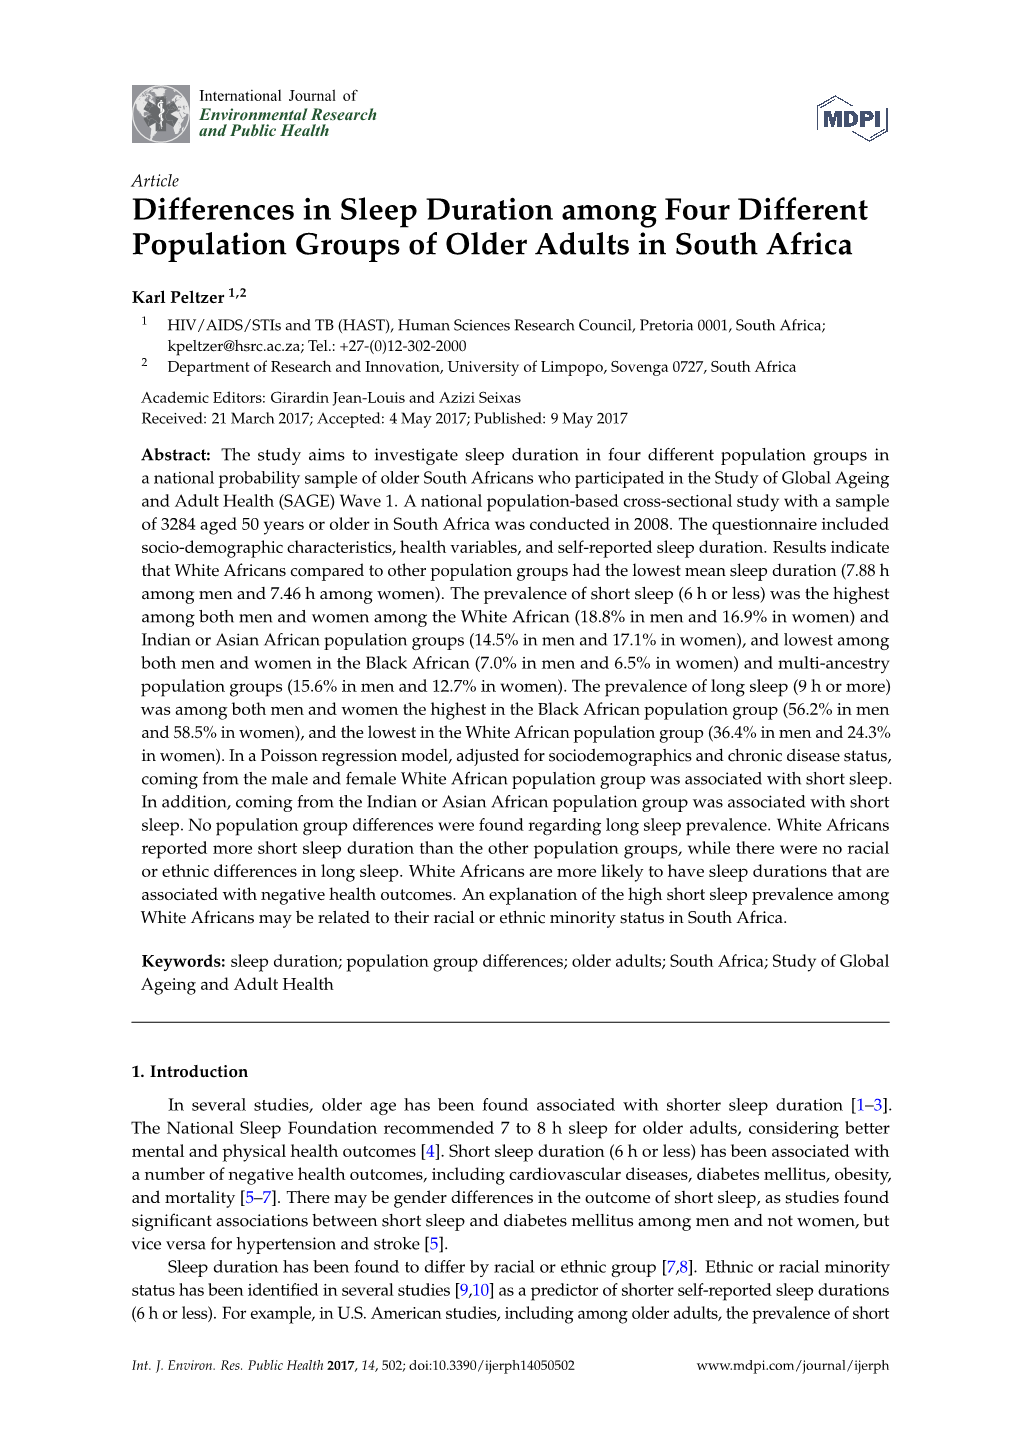 Differences in Sleep Duration Among Four Different Population Groups of Older Adults in South Africa